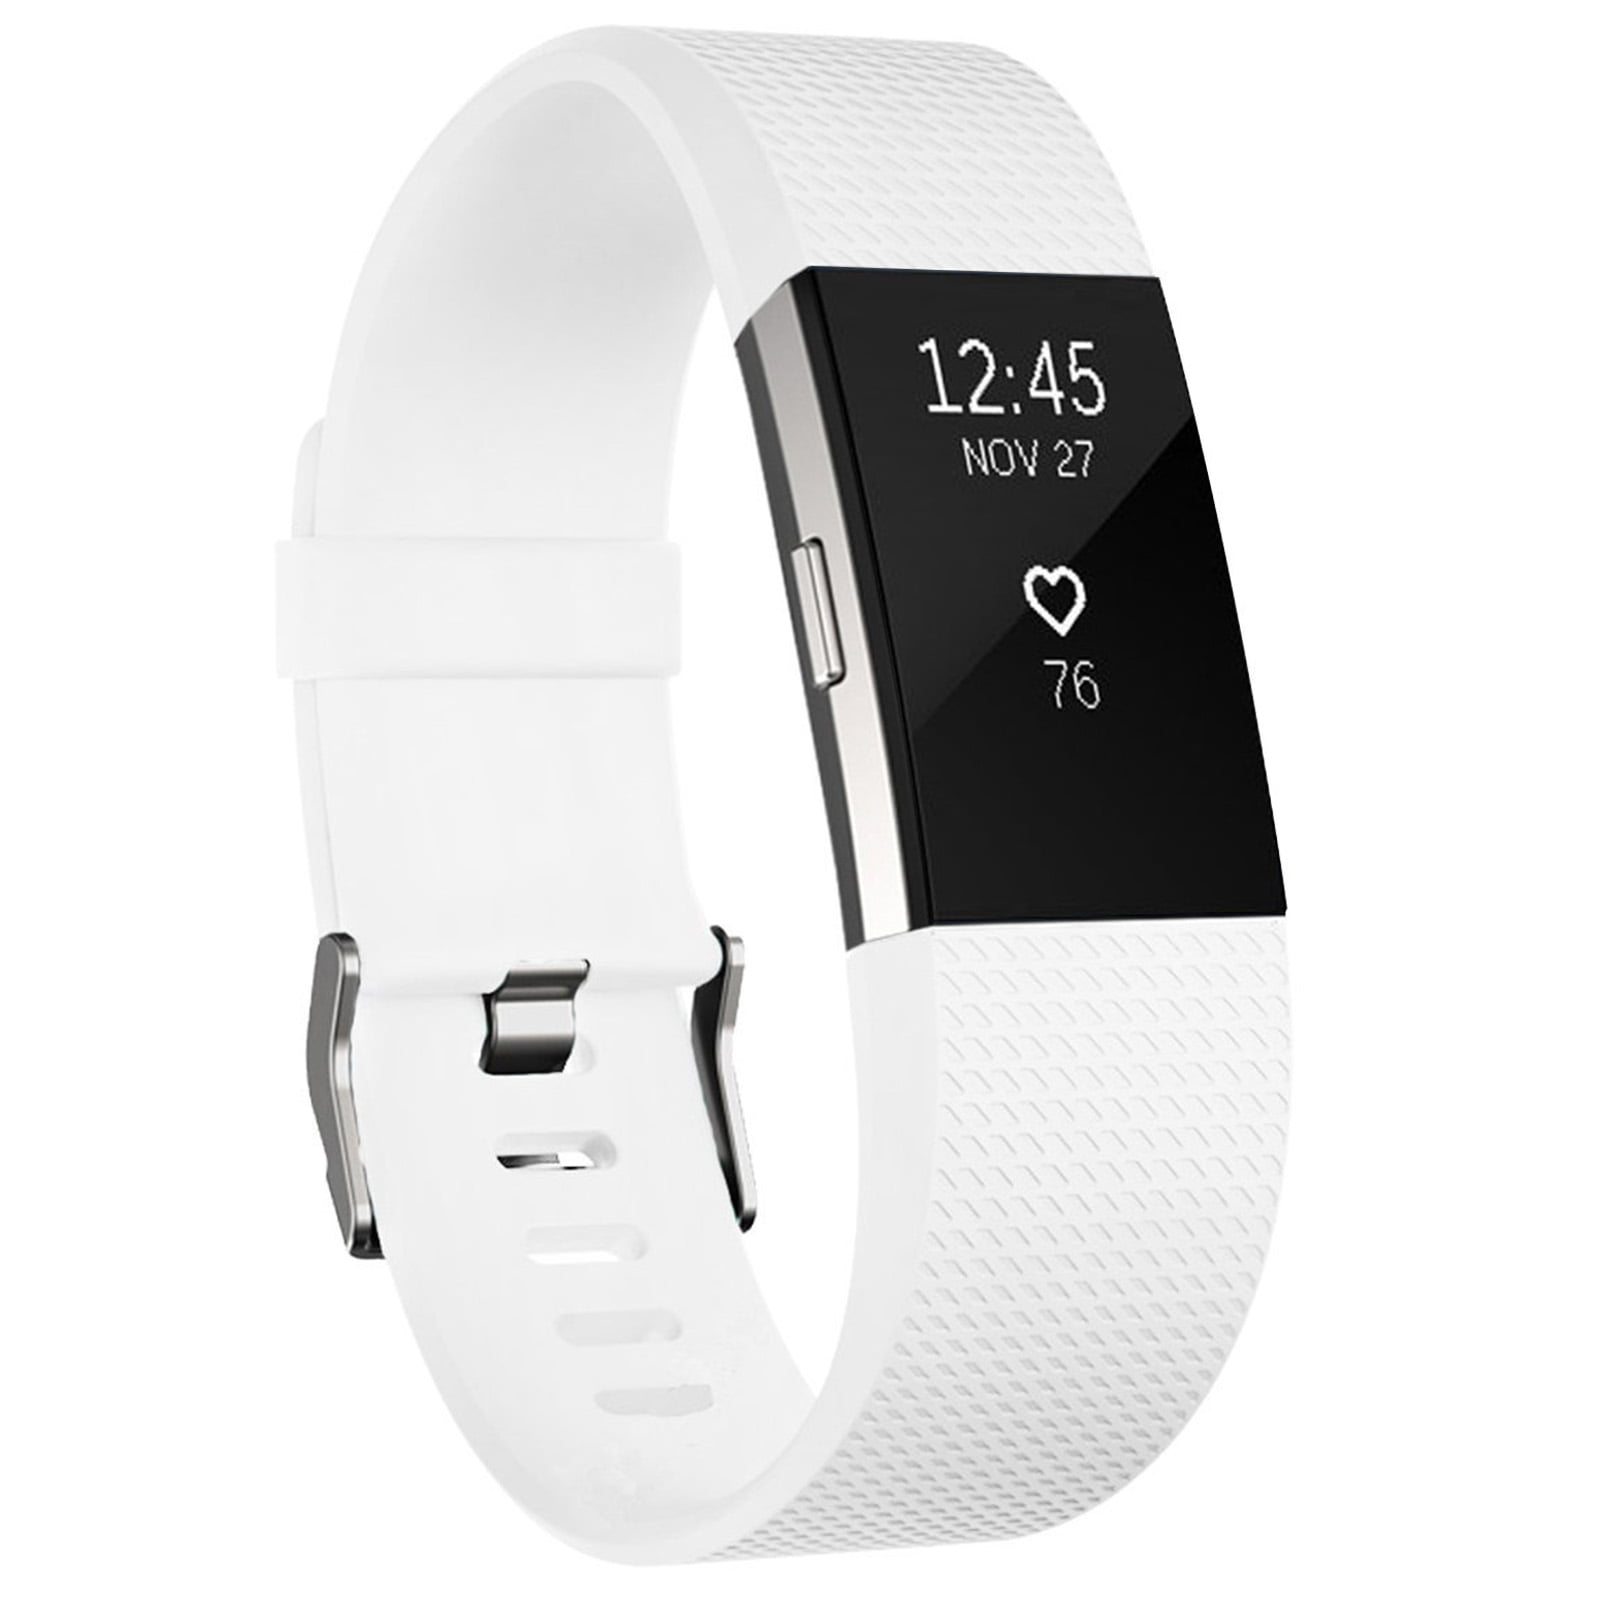 New Fitbit Charge 2 Band Black 